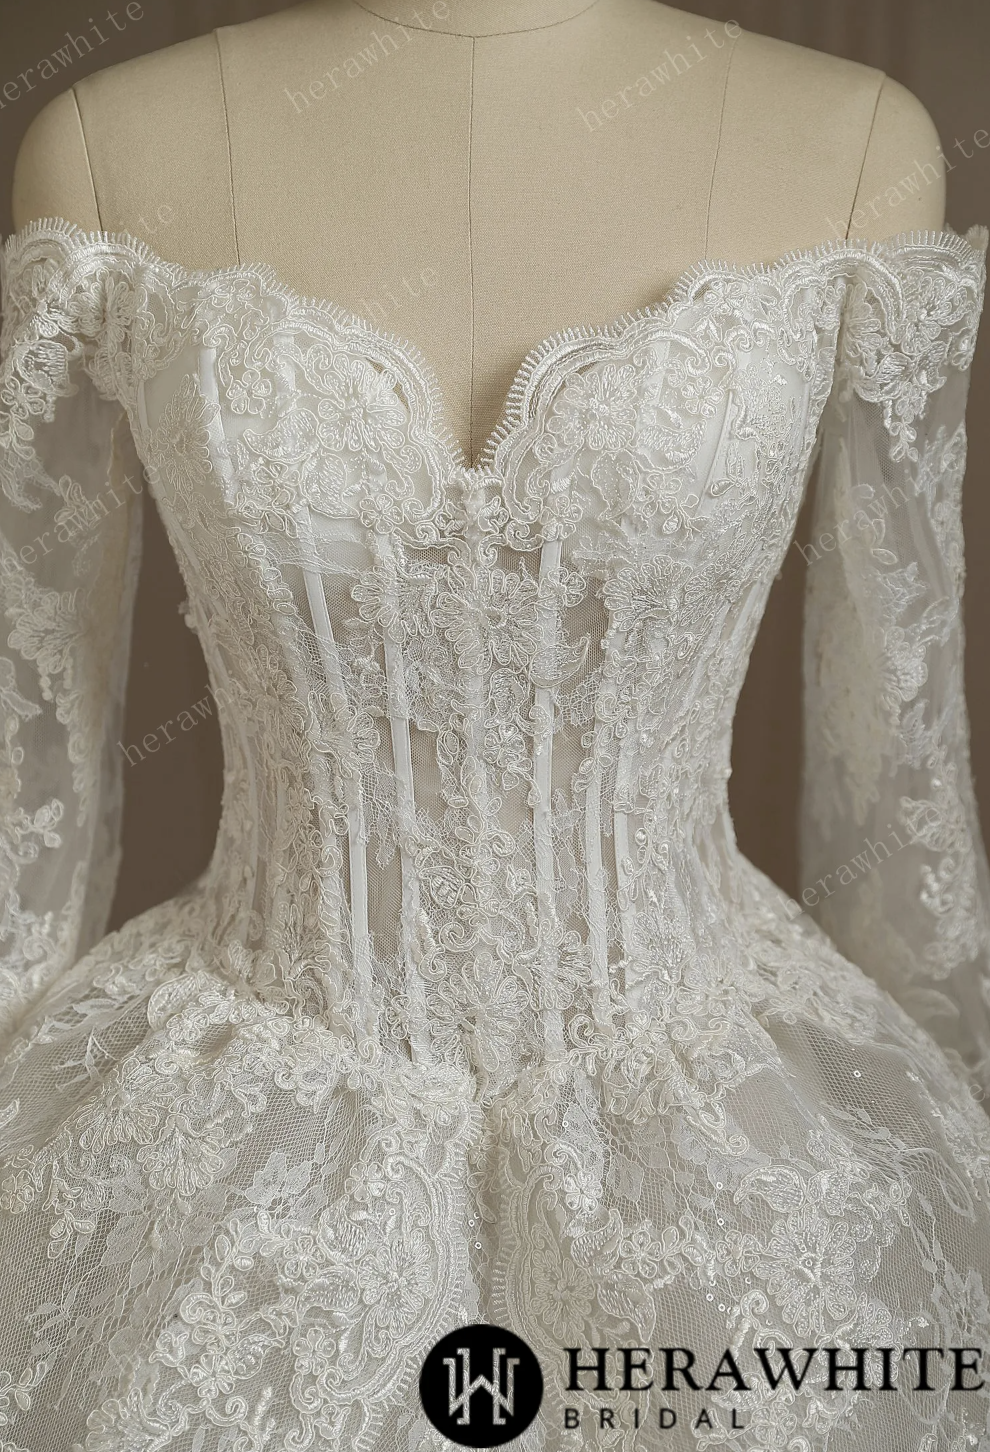 Short Lace Wedding Dress With Long Sleeves